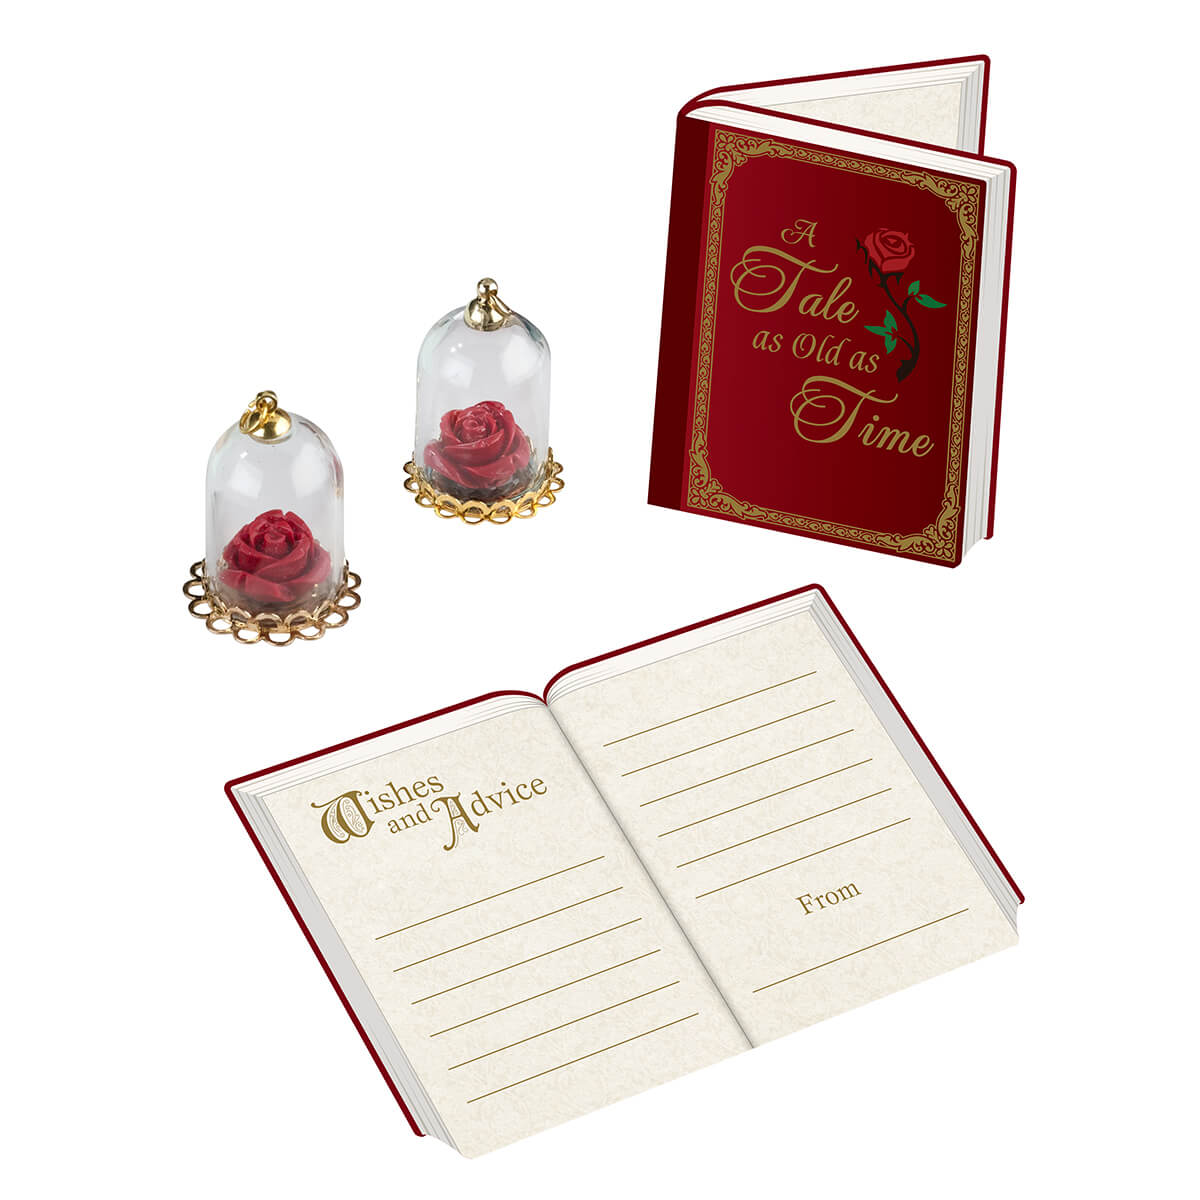 Fairy Tale Signing Cards and Rose Dome Favors